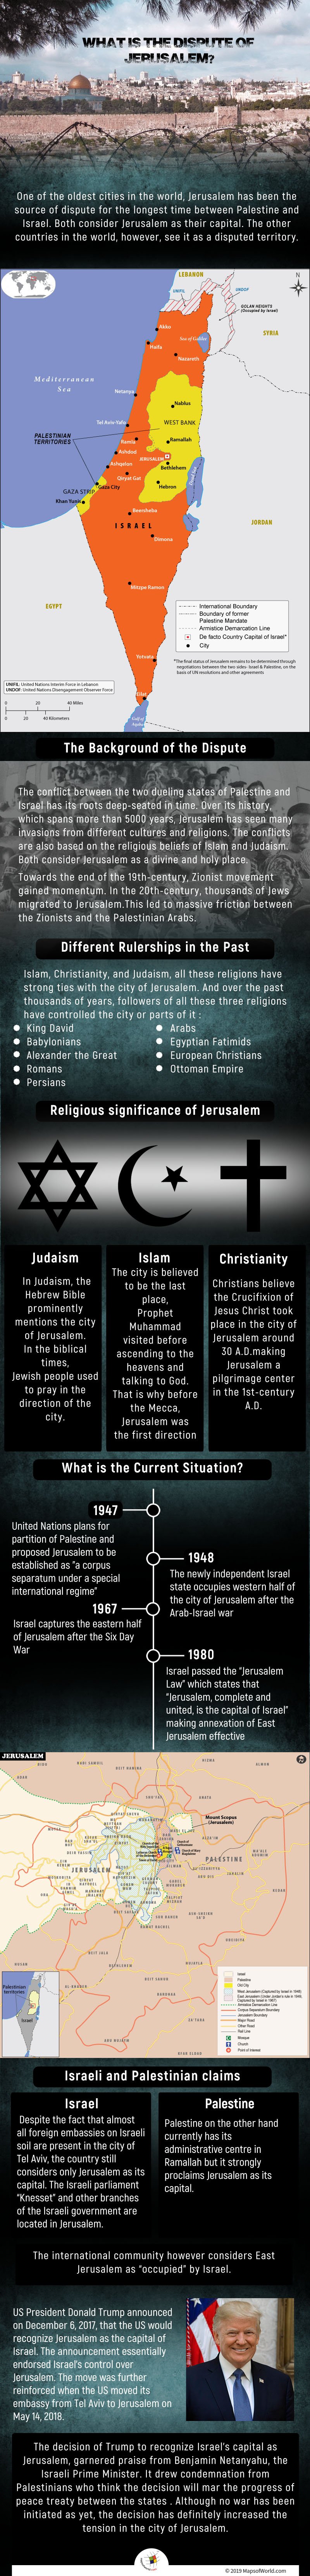 Infographic Giving Details on The Dispute of Jerusalem